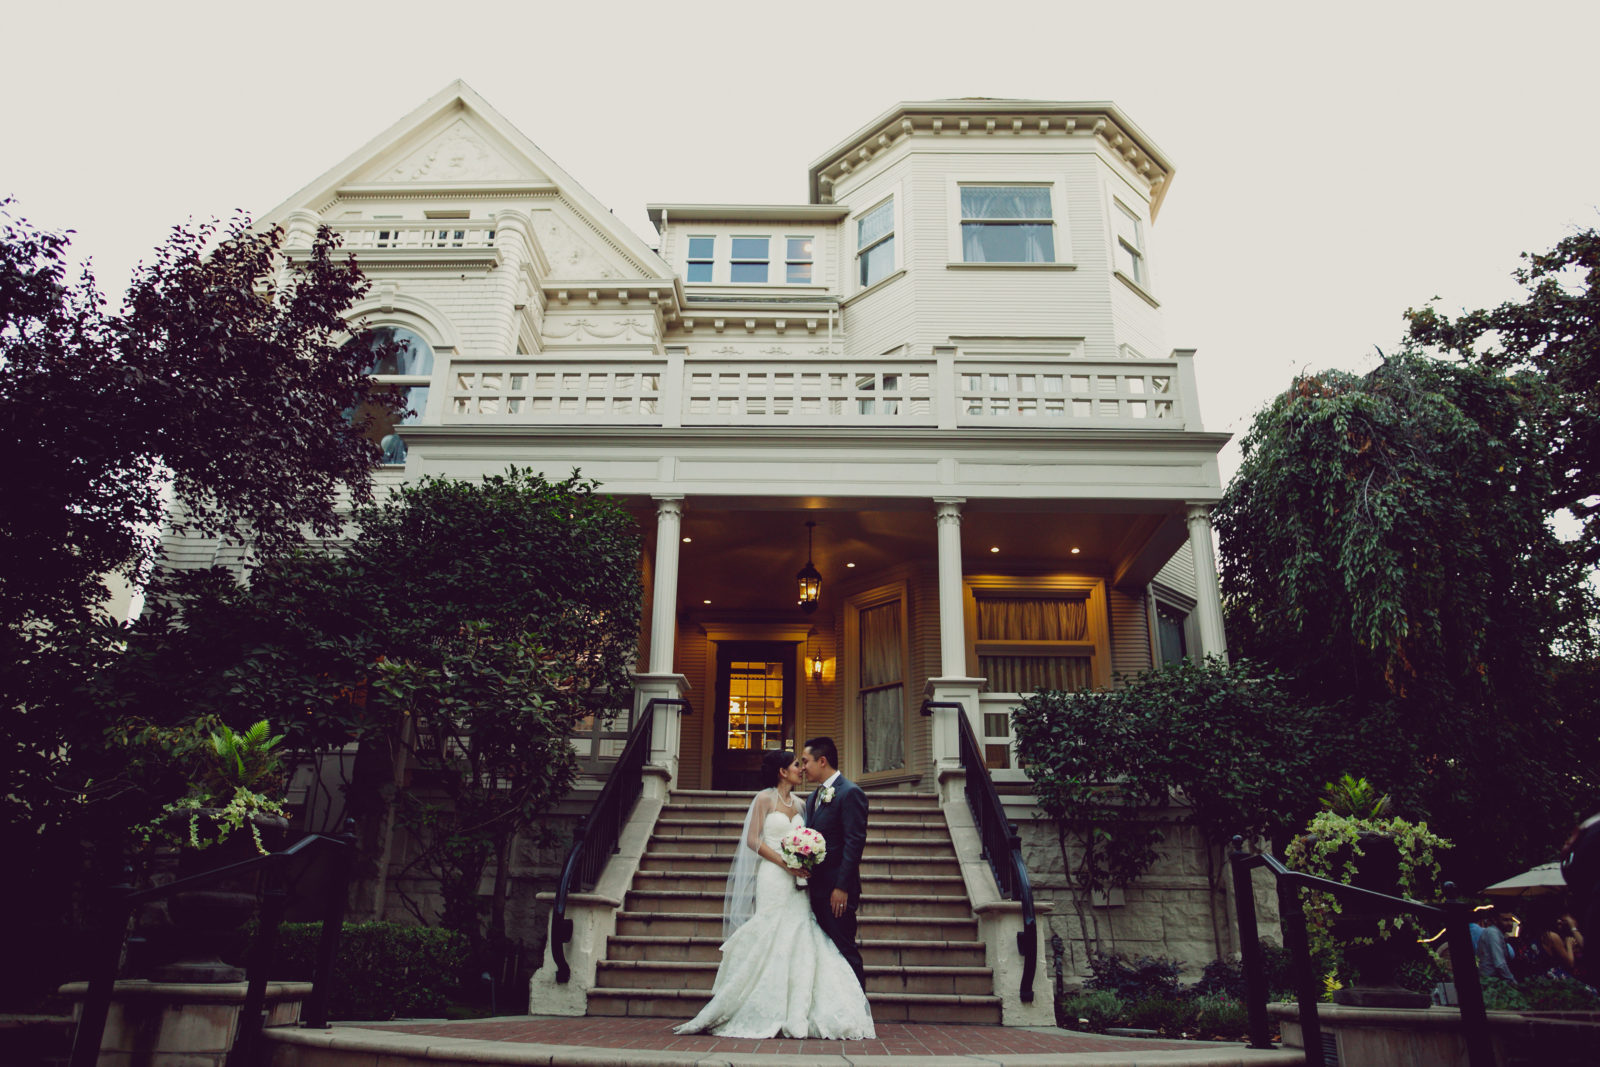 Amazing Wedding Venue In Sacramento in the world Check it out now 